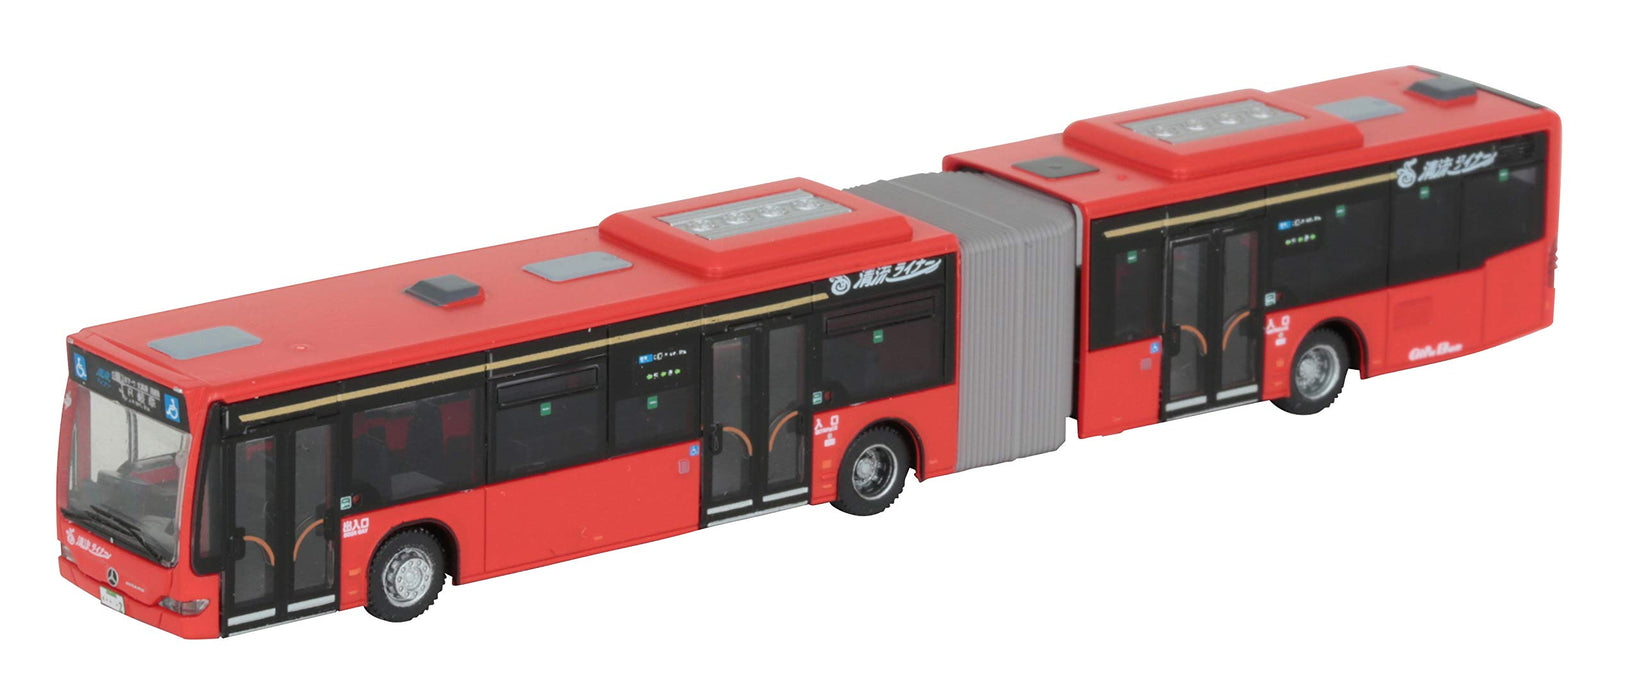 Tomytec Gifu Bus Seiryu Liner - Limited Edition Diorama Supplies from The Bus Collection